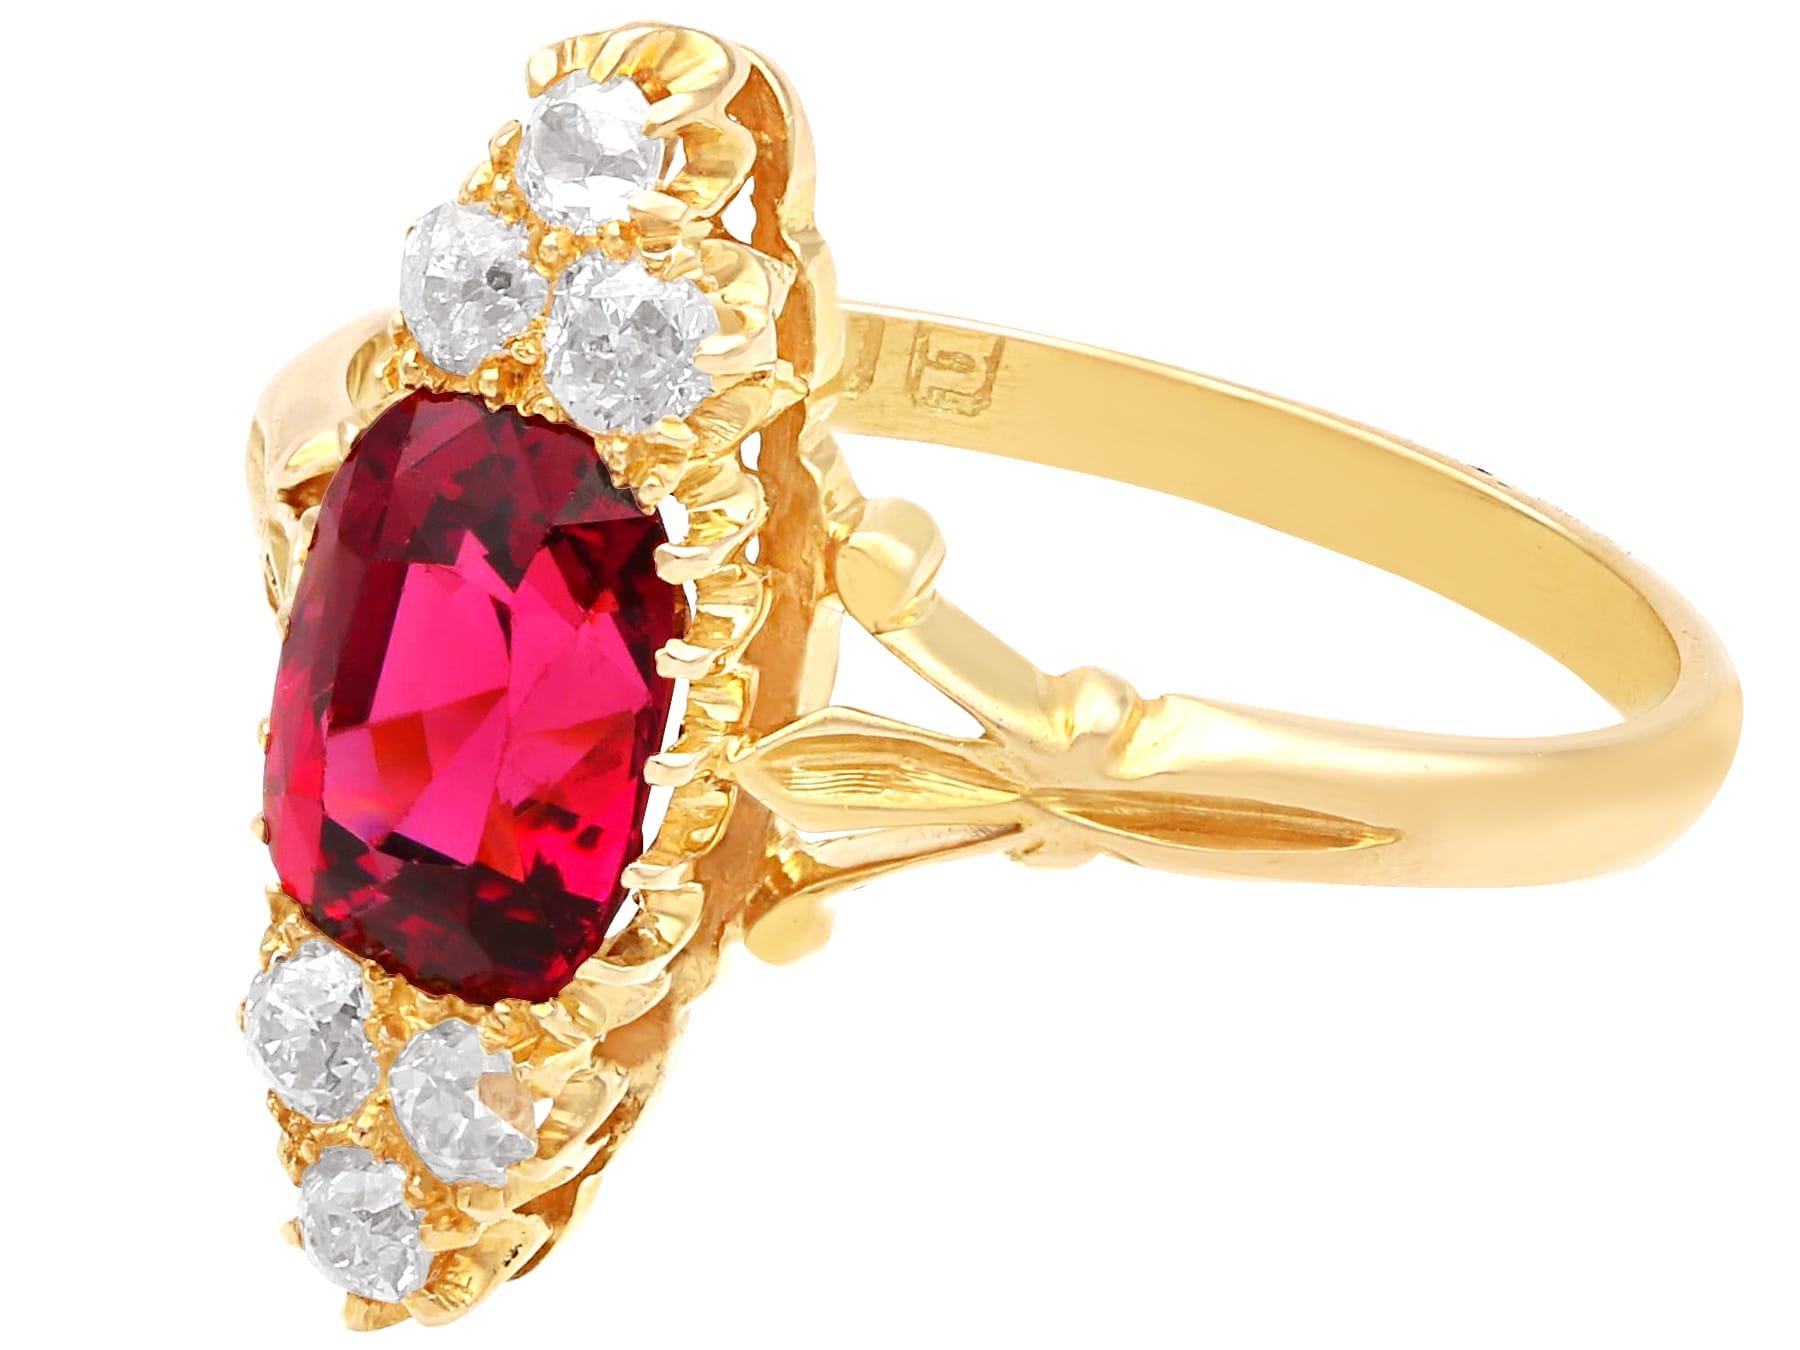 Cushion Cut Antique 1910s 2.48 Carat Garnet and Diamond 18k Yellow Gold Cocktail Ring For Sale